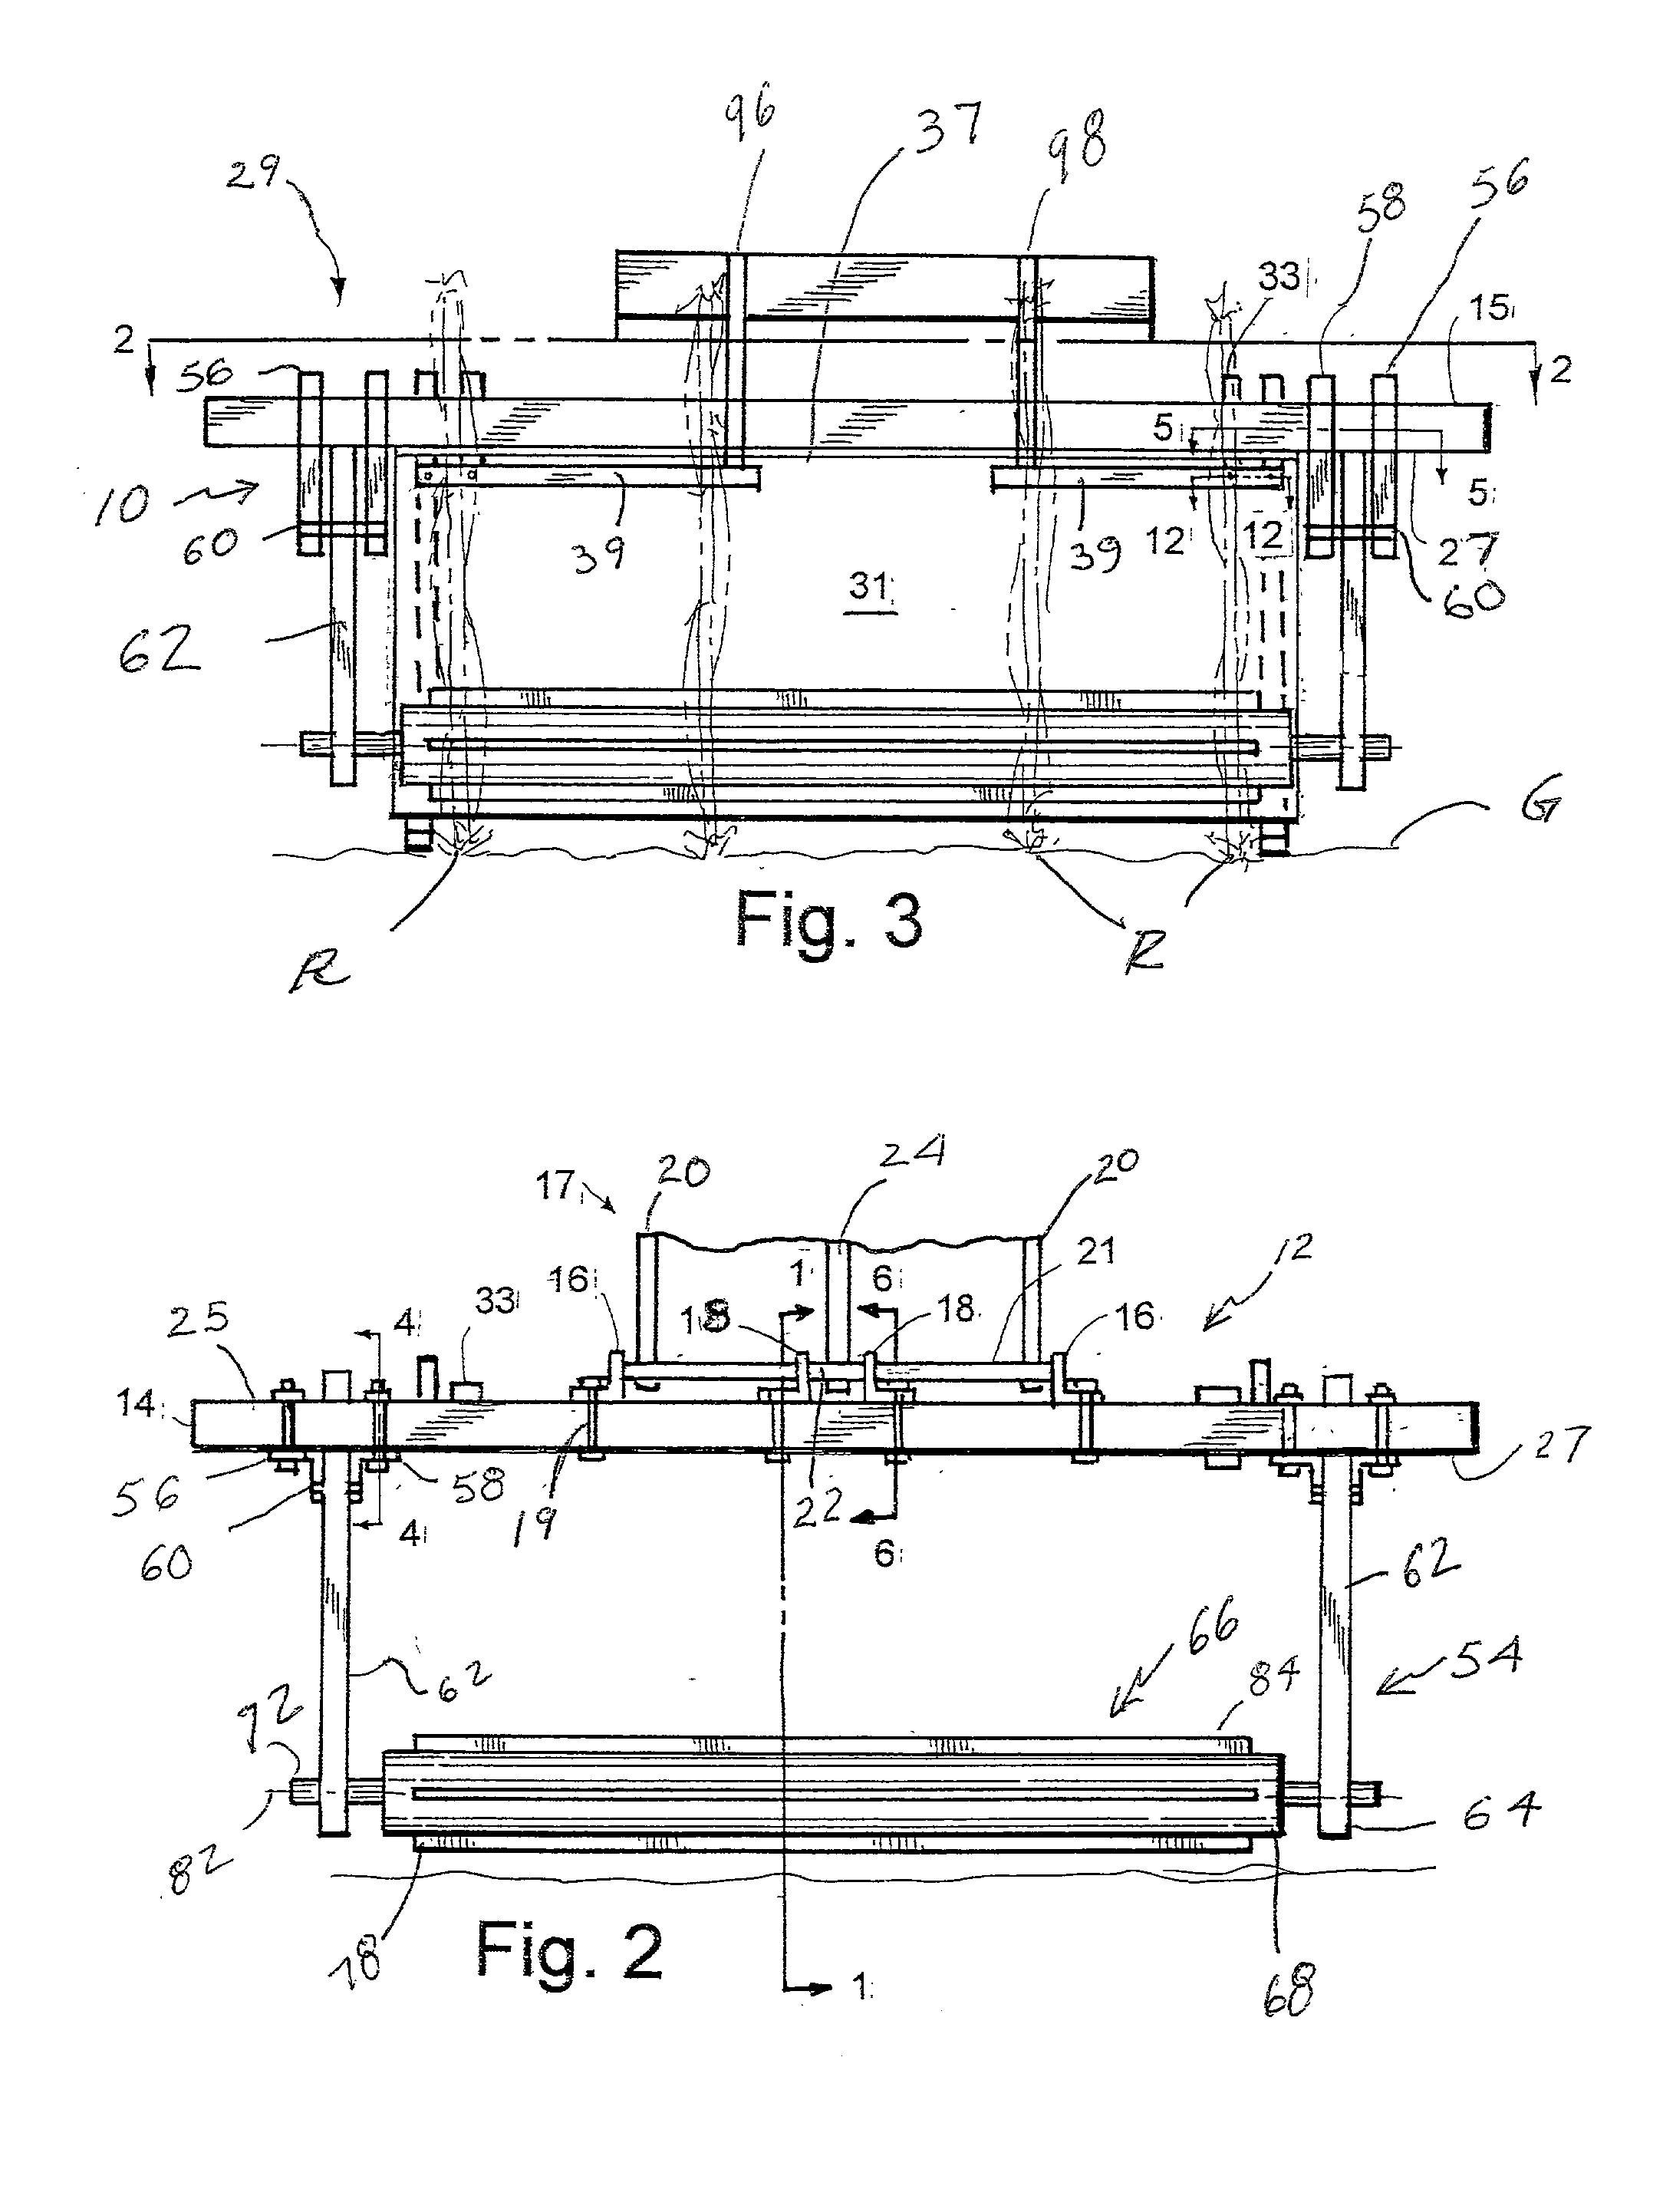 Apparatus and method for knocking down and crushing farm crop residue